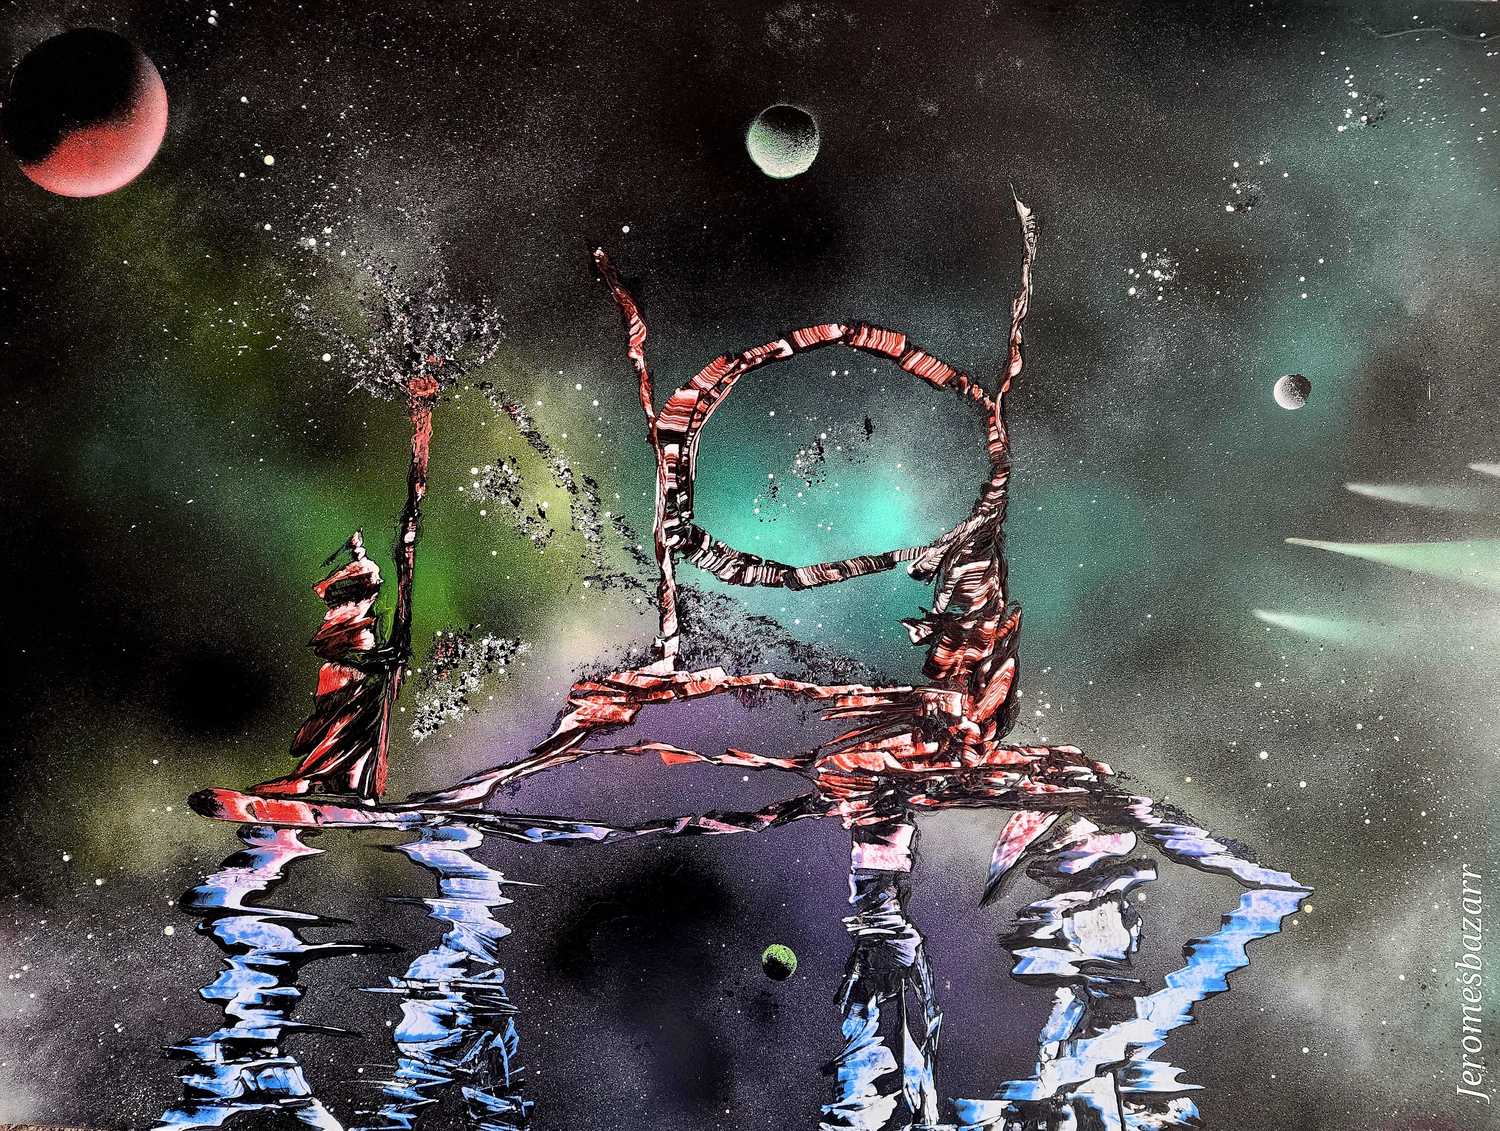 SPACE OASIS - SPRAY PAINT ART By Skech 